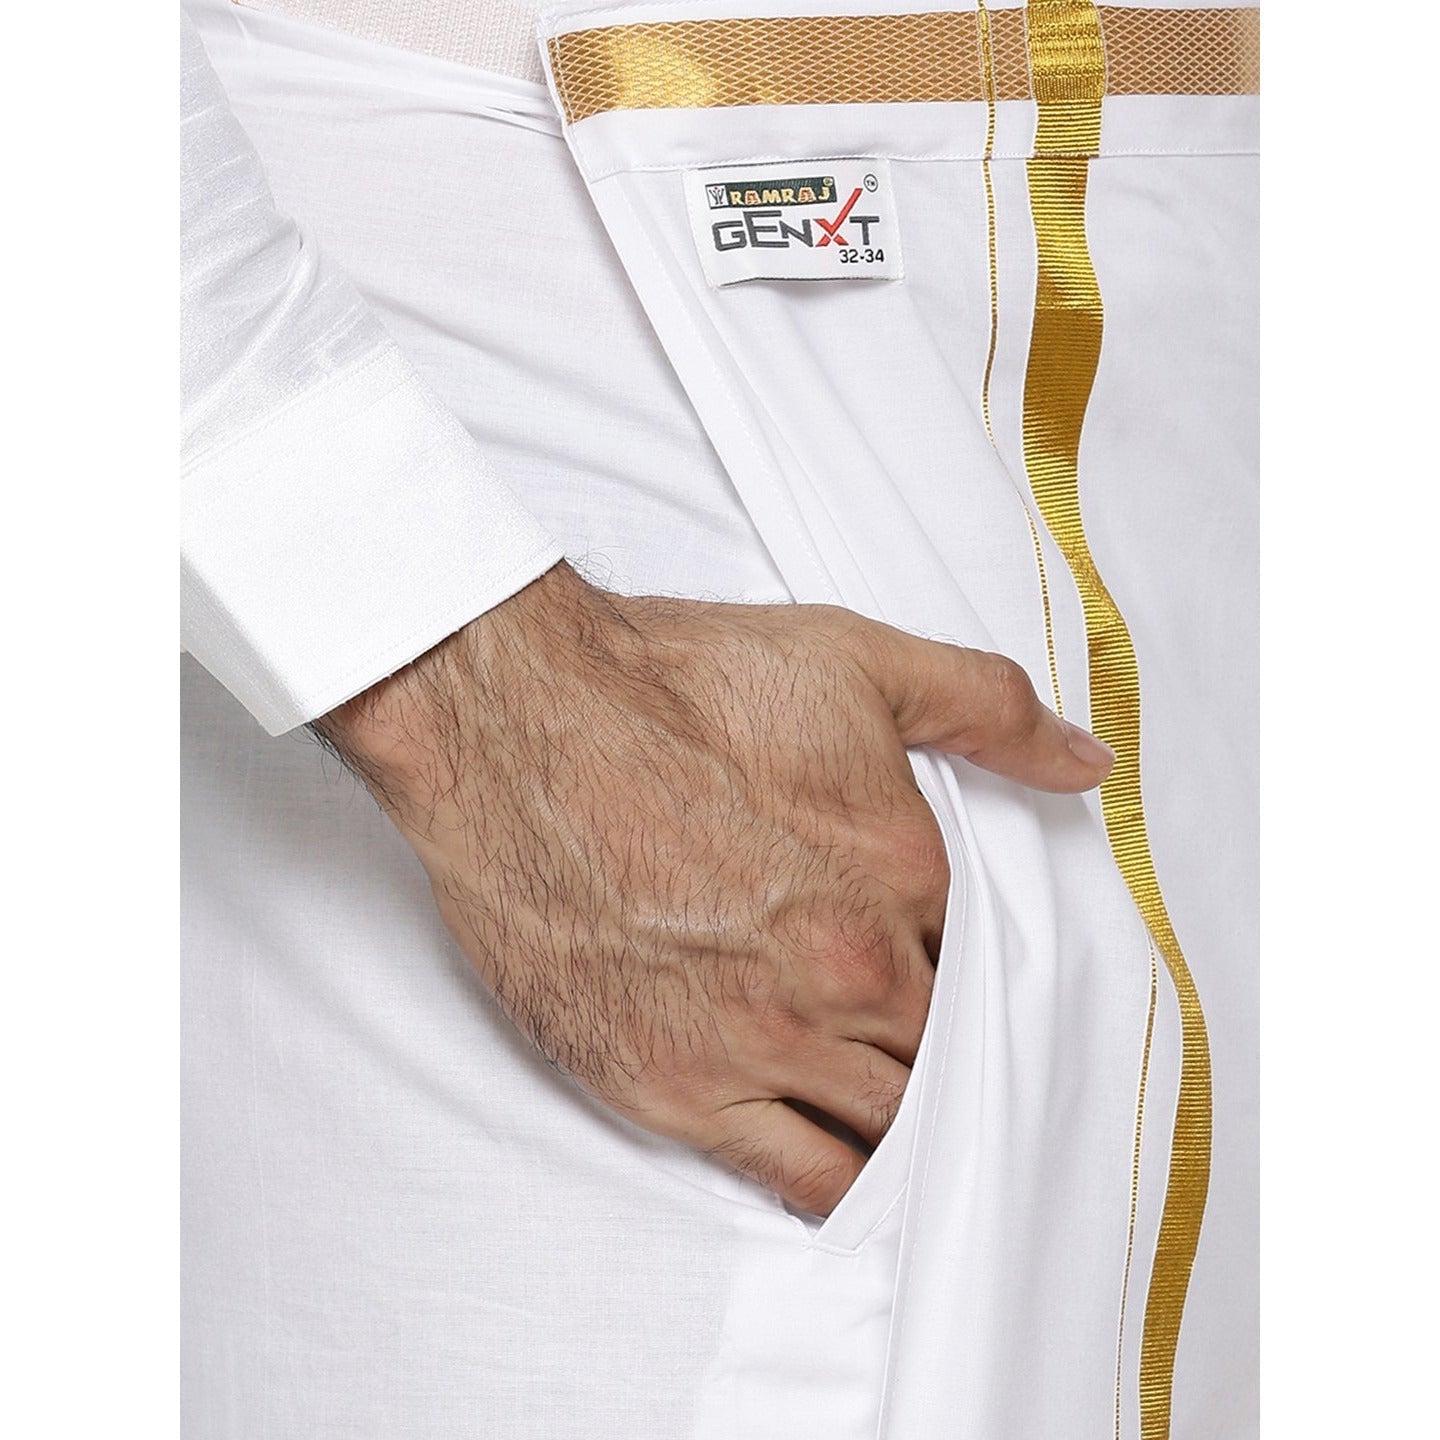 Mens Readymade Double Dhoti White with Gold Jari Border-Pocket view